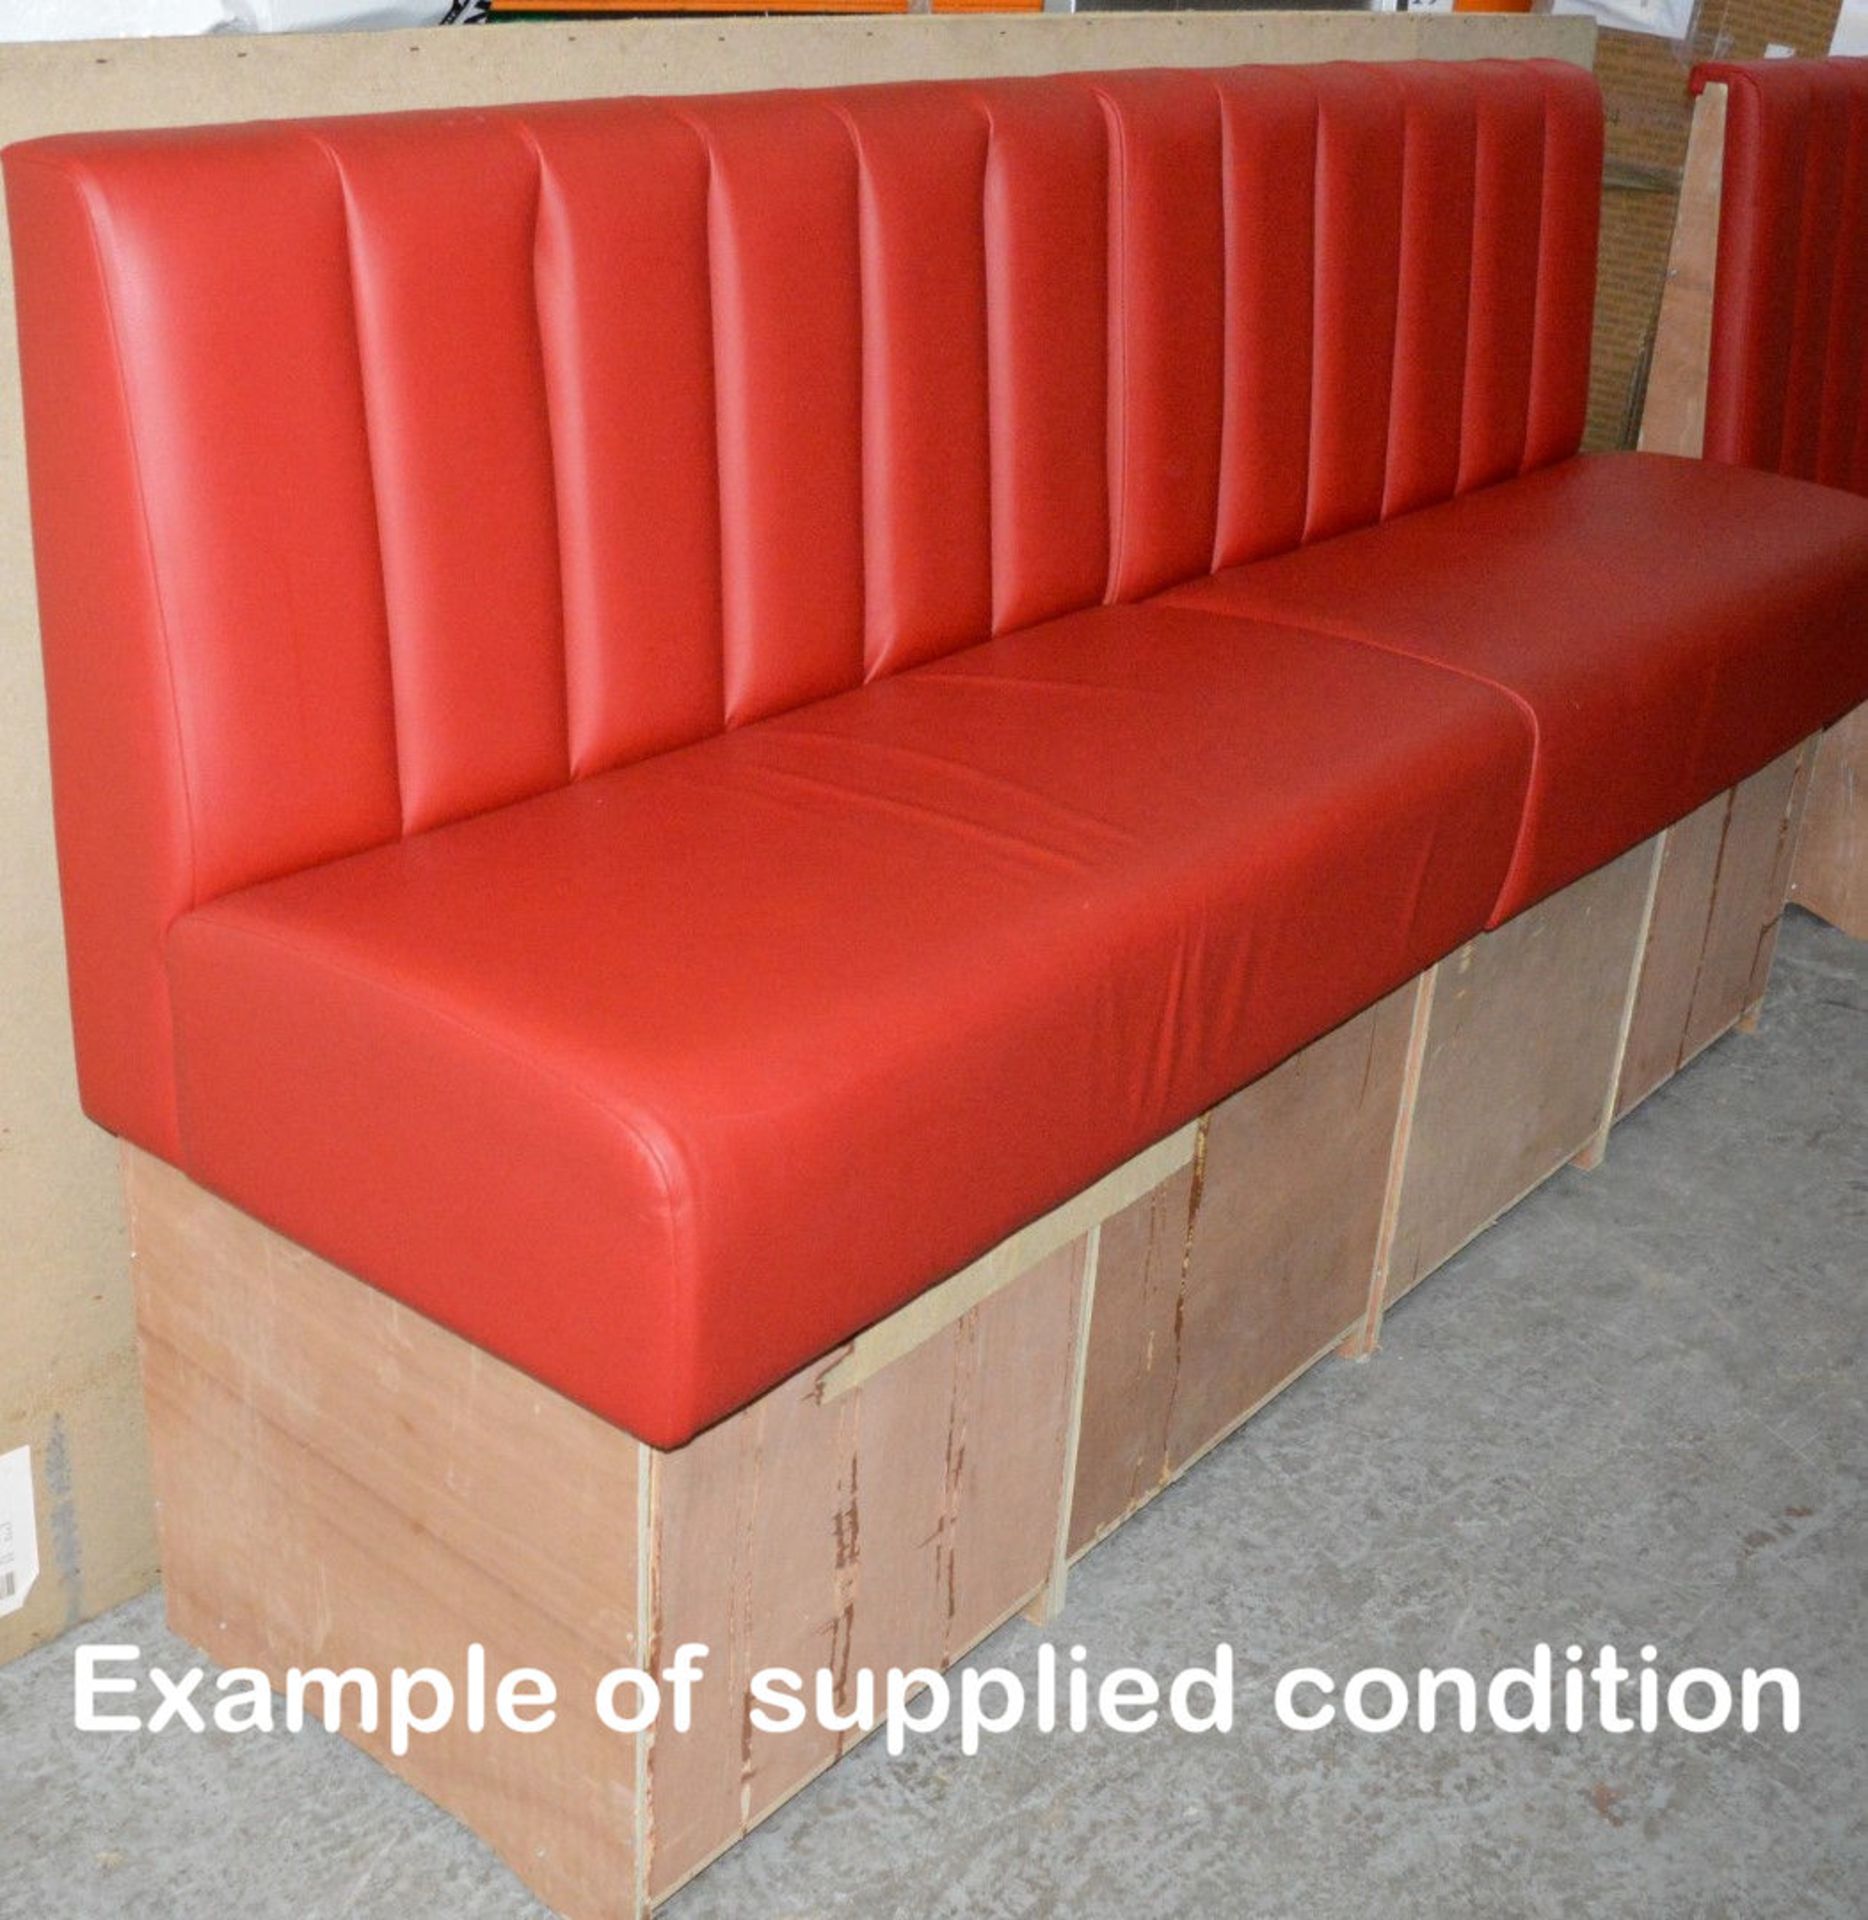 2 x Seating Booth Sections Upholstered In A Bright Red Leather - Also Includes 1 x Privacy Panel - Image 4 of 9